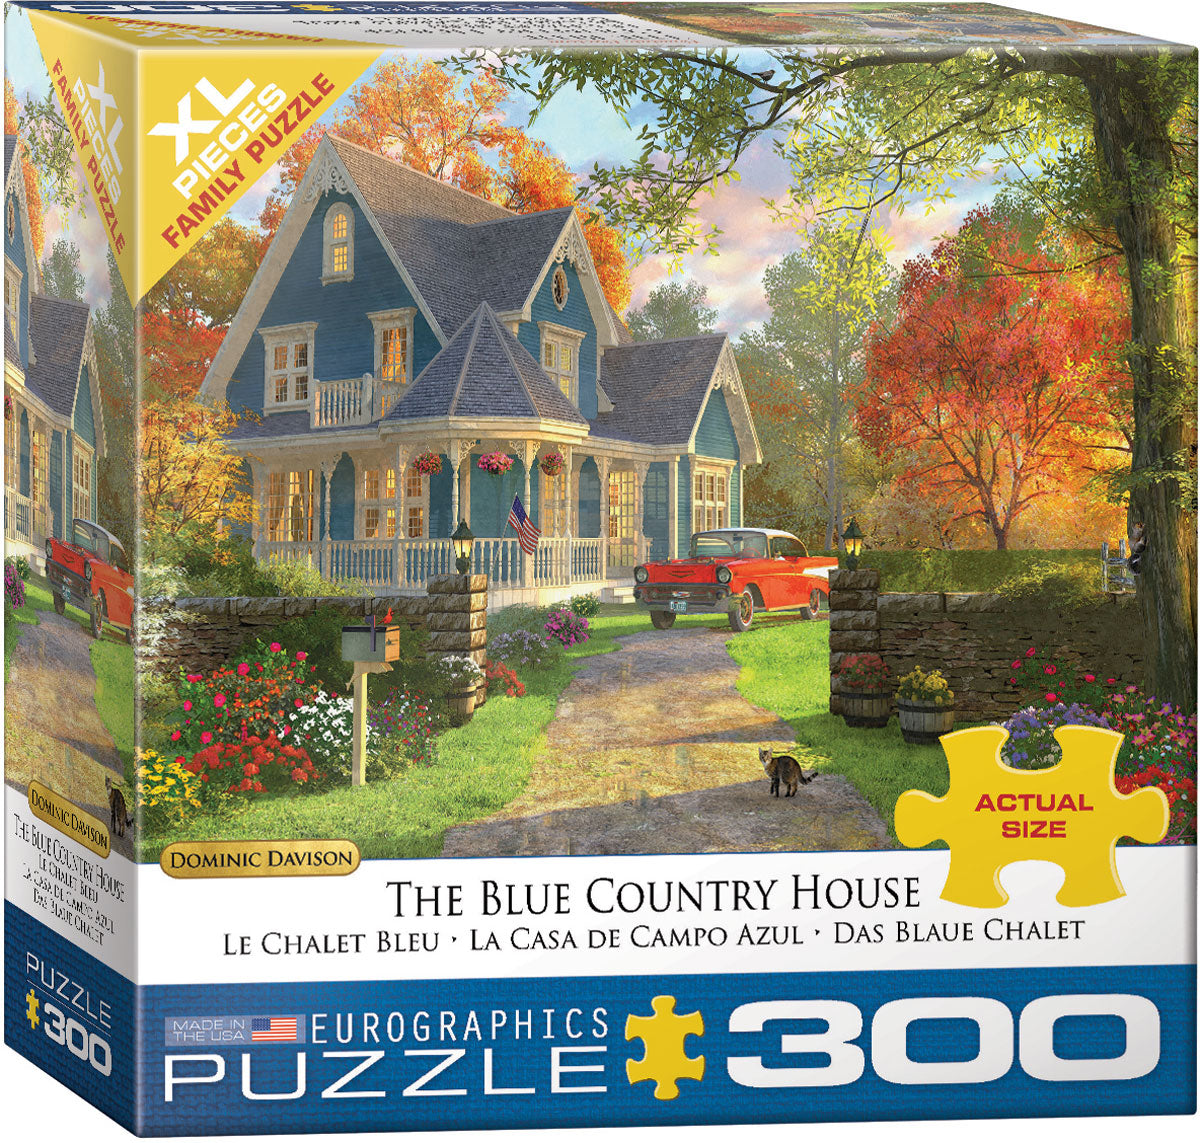 The Blue Country House